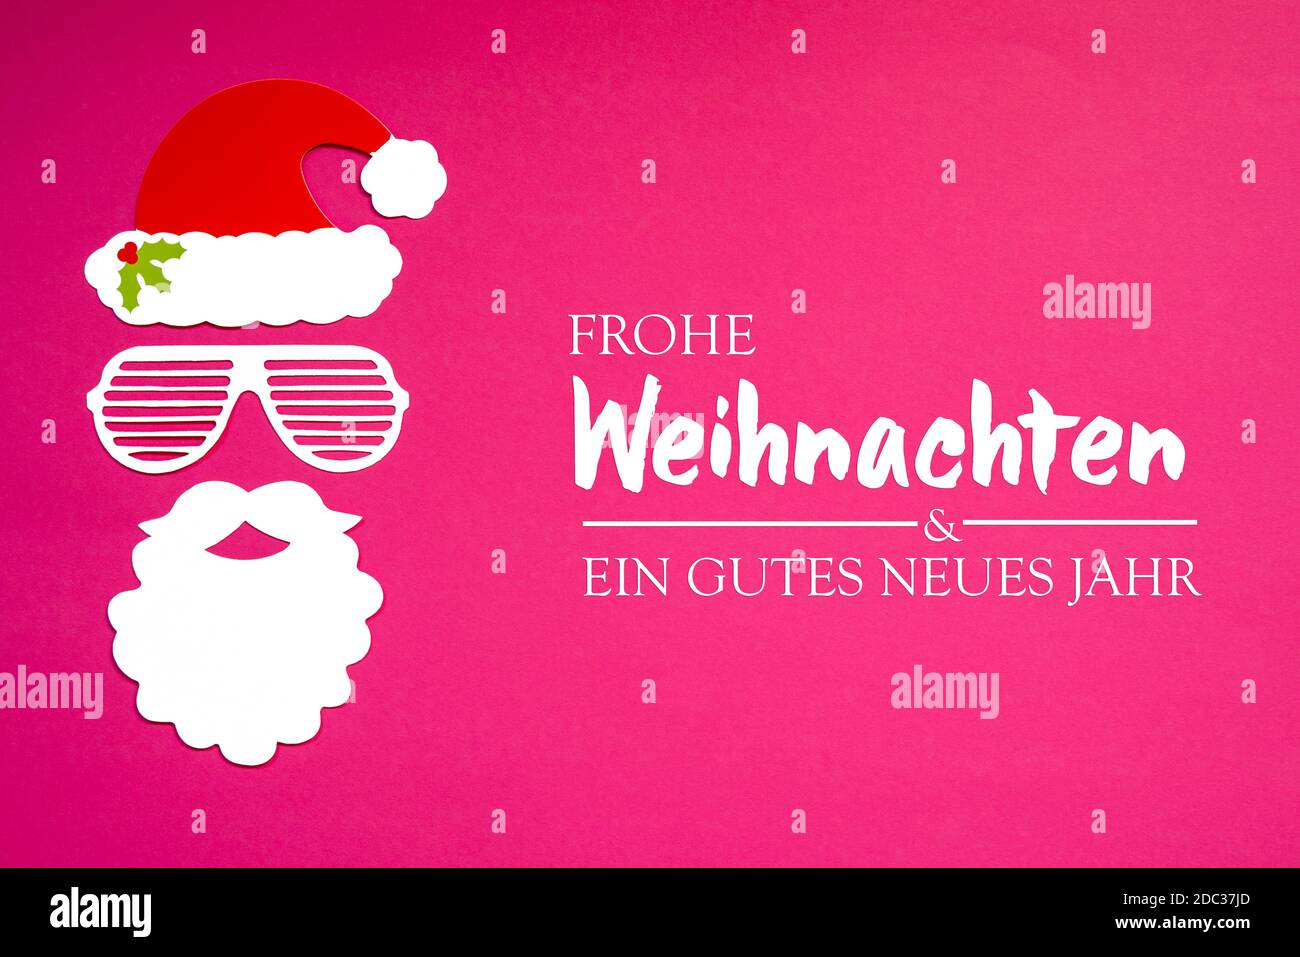 German Frohe Weihnachten Und Ein Gutes Neues Jahr Means Merry Christmas And A Happy New Year. Santa Claus Paper Mask With Christmas Decoration And Acc Stock Photo